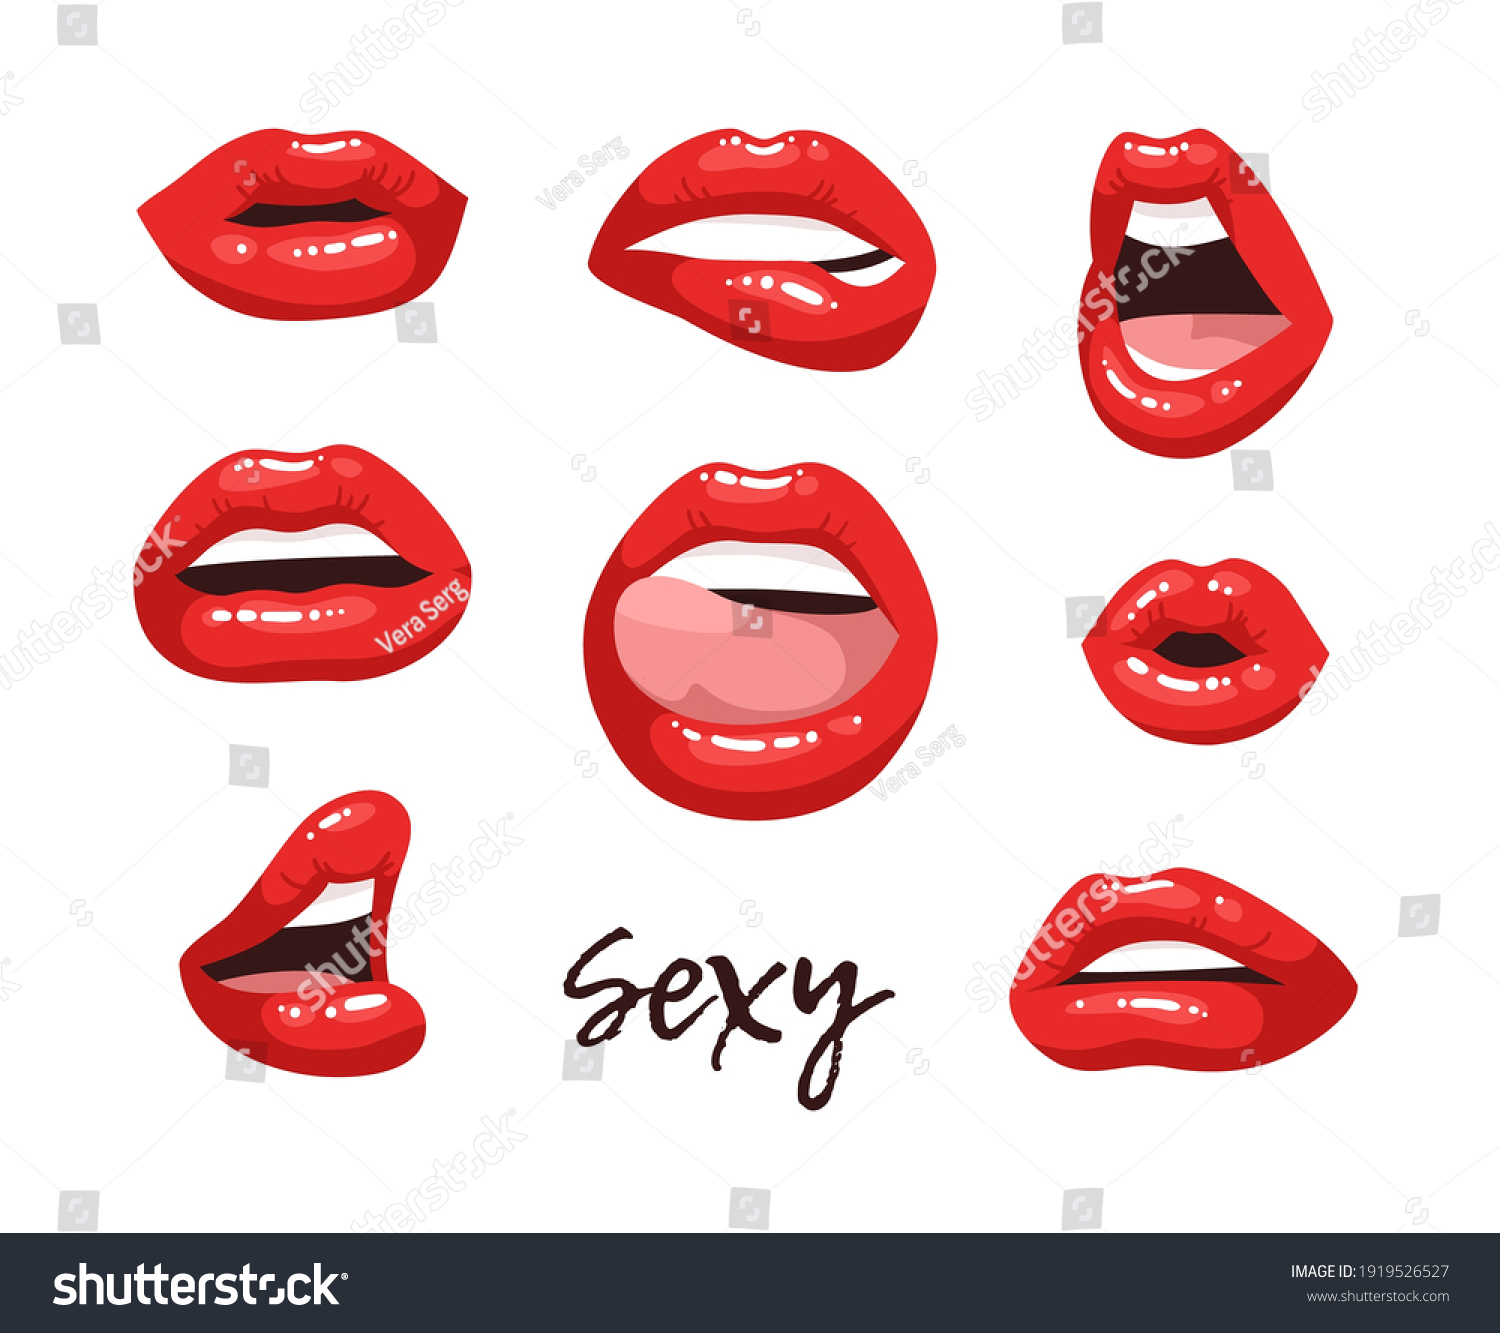 Sexy Female Lips Red Lipstick Vector Stock Vector Royalty Free 1919526527